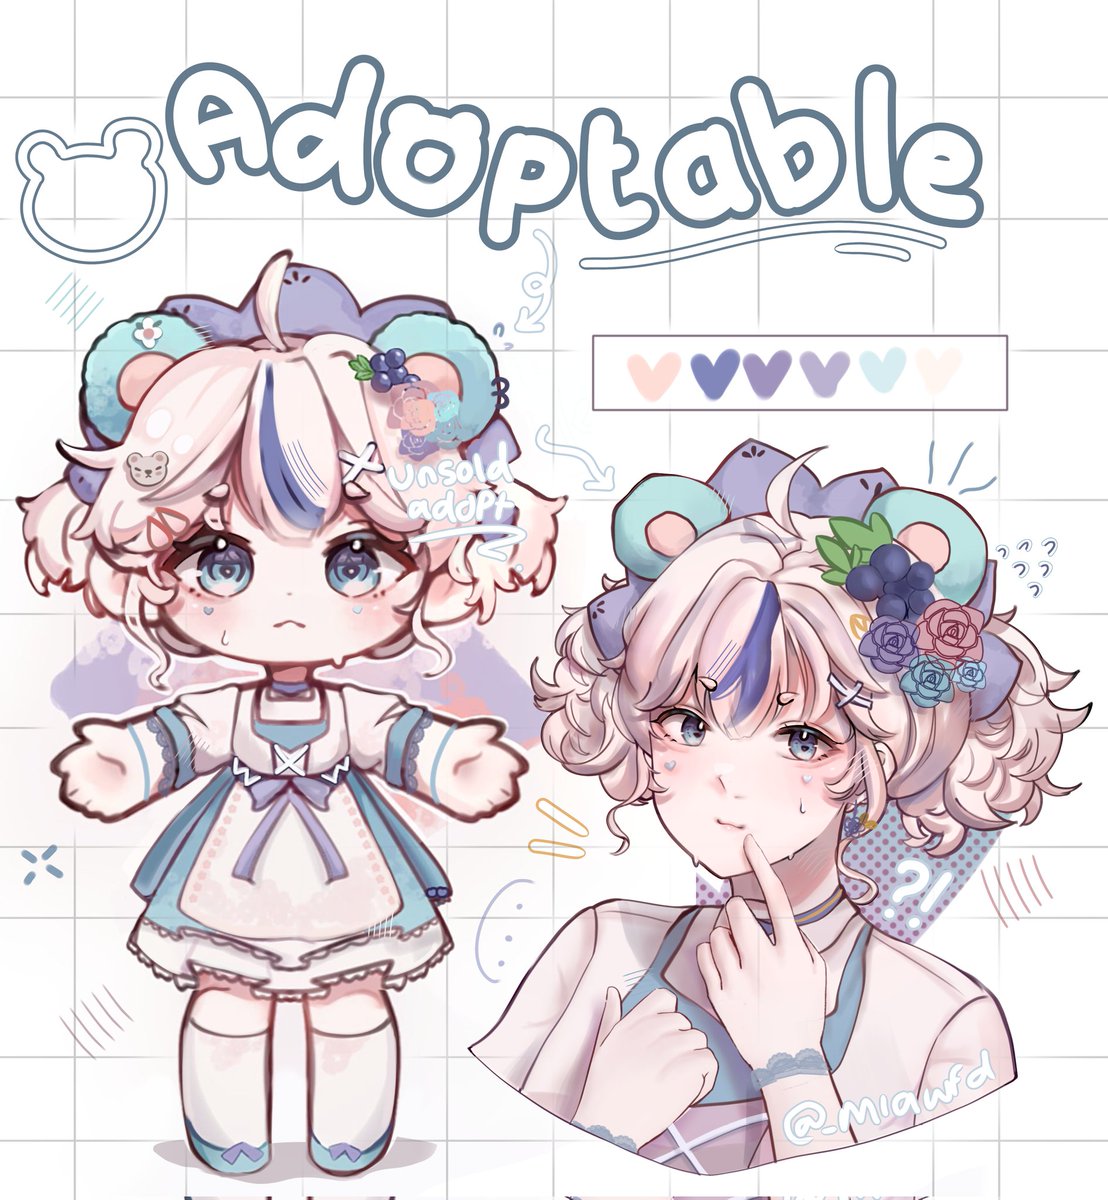 Blueberry Bear adoptable ｡⁠*ﾟ⁠+ 🐻‍❄️🫐

• Starting bid: 15$
• Min icrase: 2$
• Auto buy: 50$ 

This already includes a bust up art‼️
🔁 And ❤️ are appreciated ;3
Payment via PayPall/ko-fi
Ends 48hrs after the last bid
#adoptable #adoptables #adoptablebid #adoptableauction